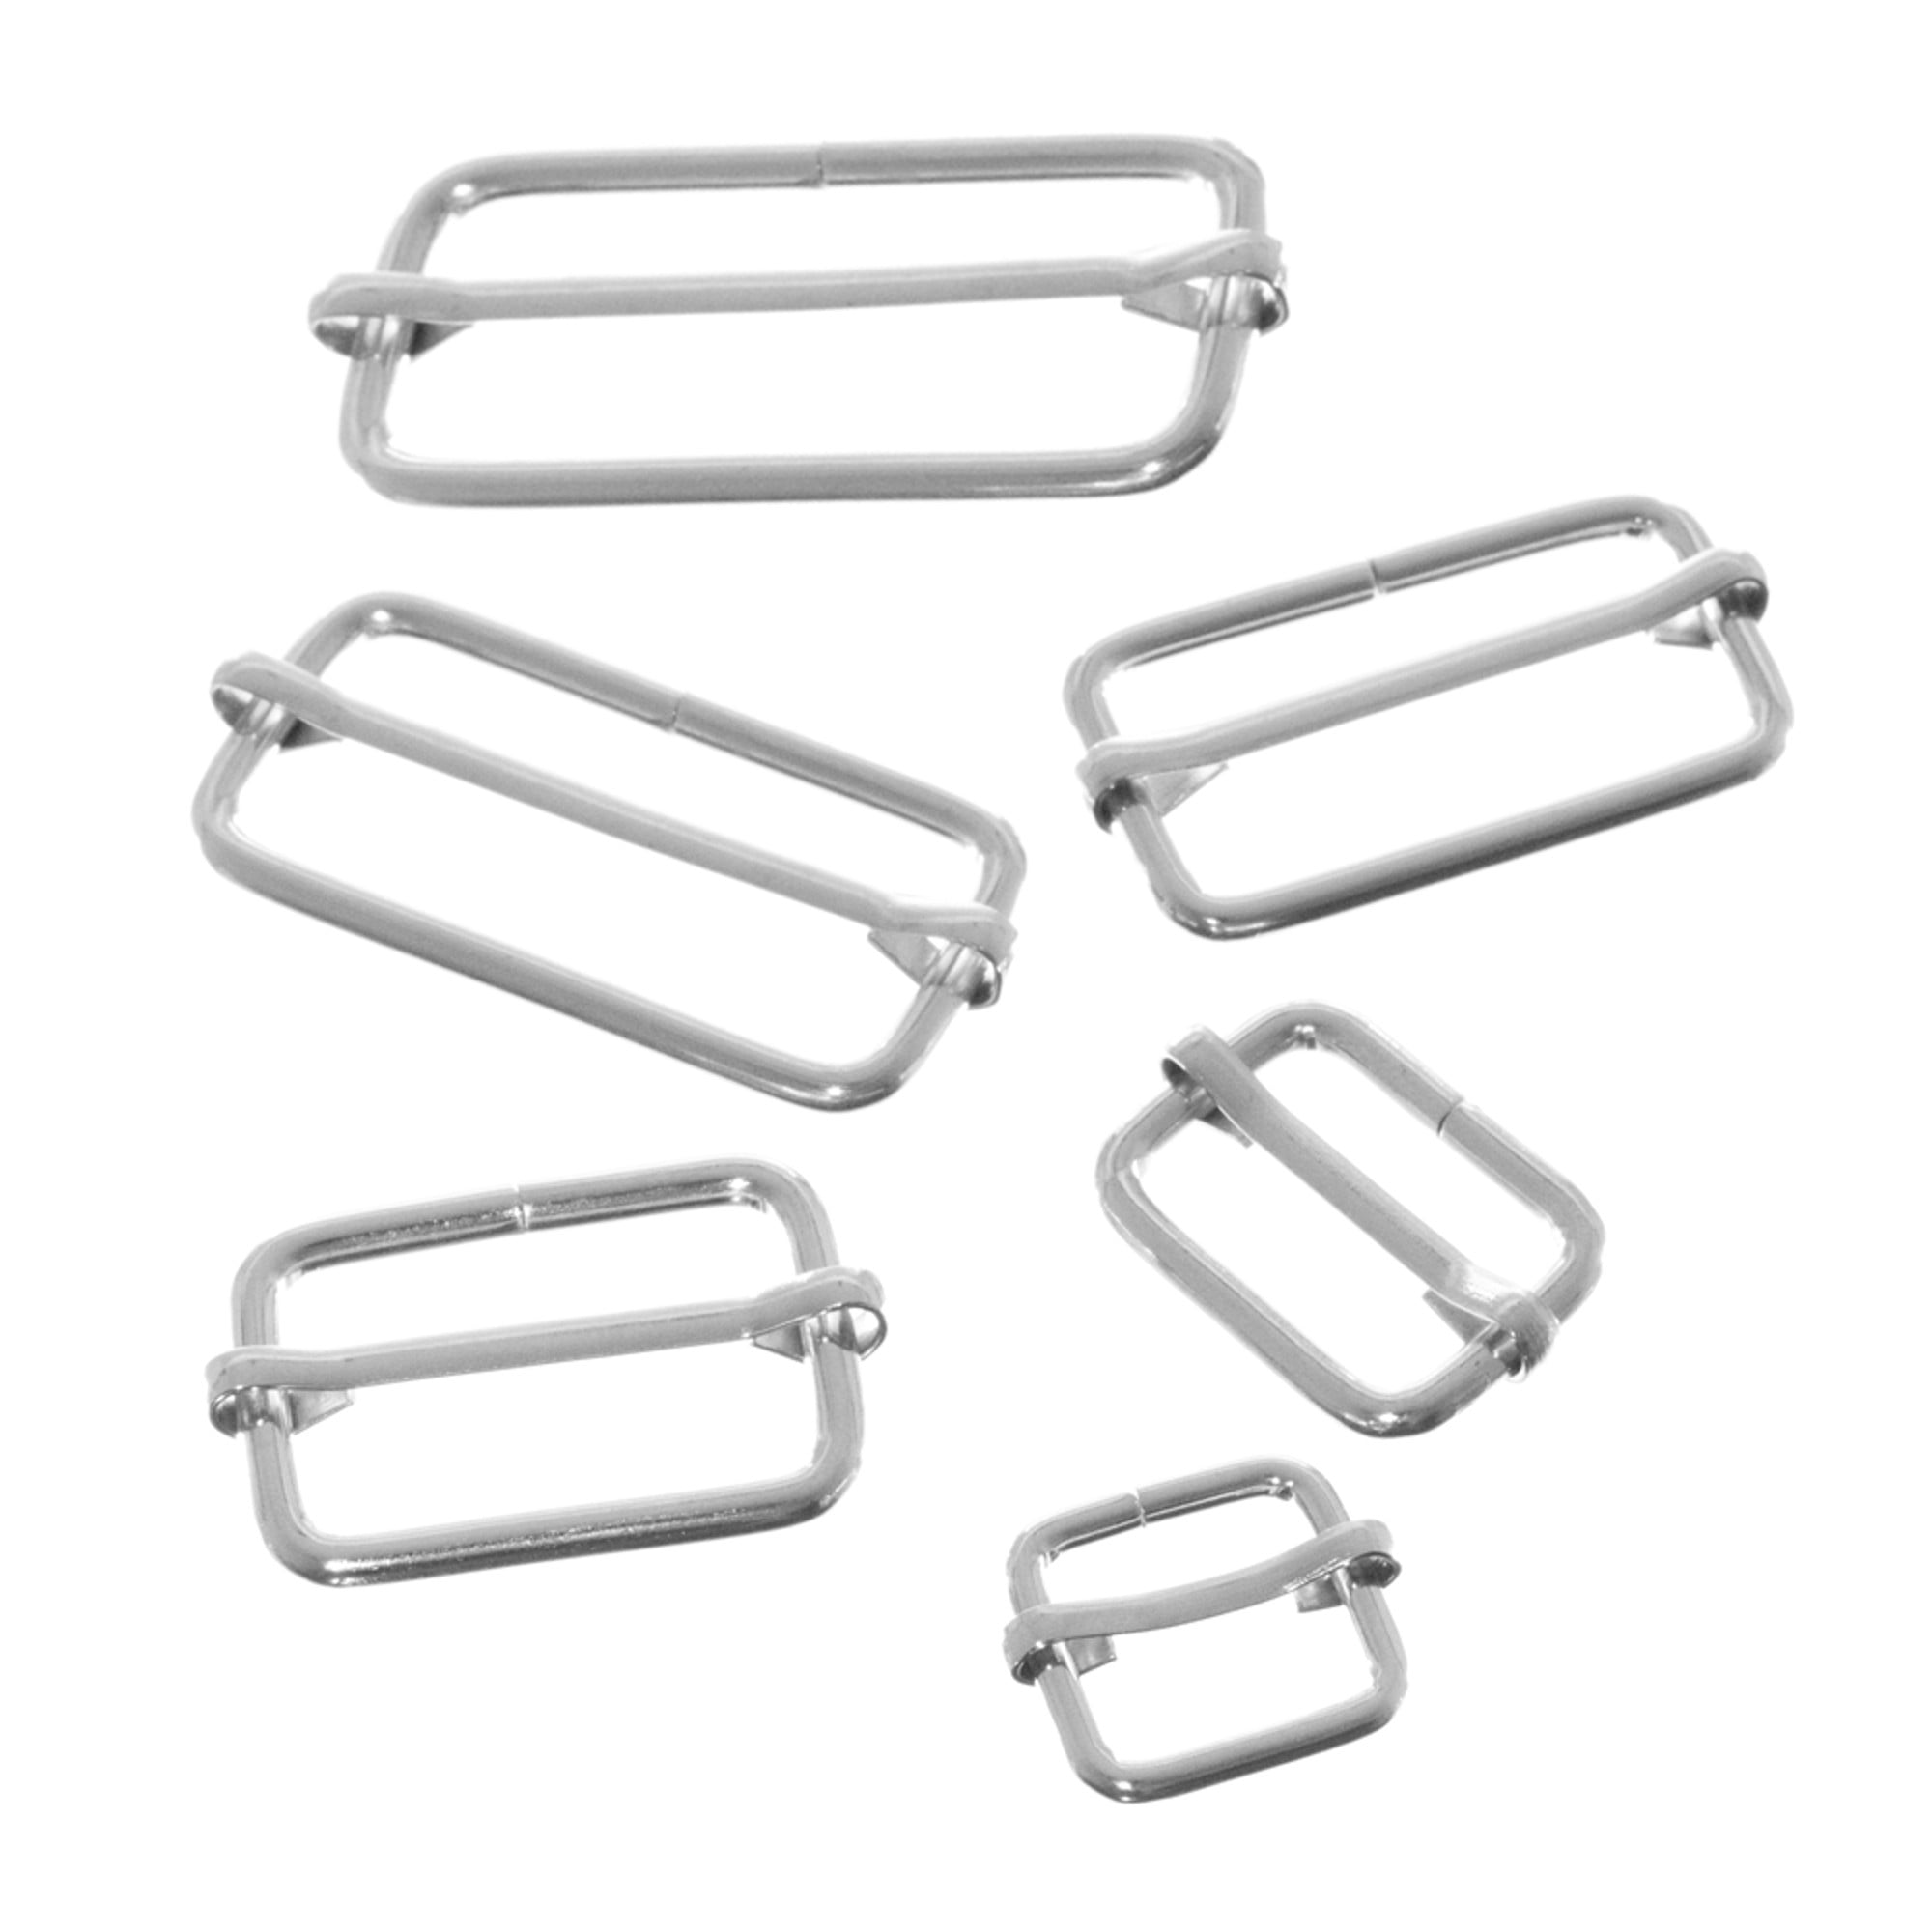 38mm Metal Rectangle Sliding Bar Strap Buckles Perfect for Backpack Accessories 